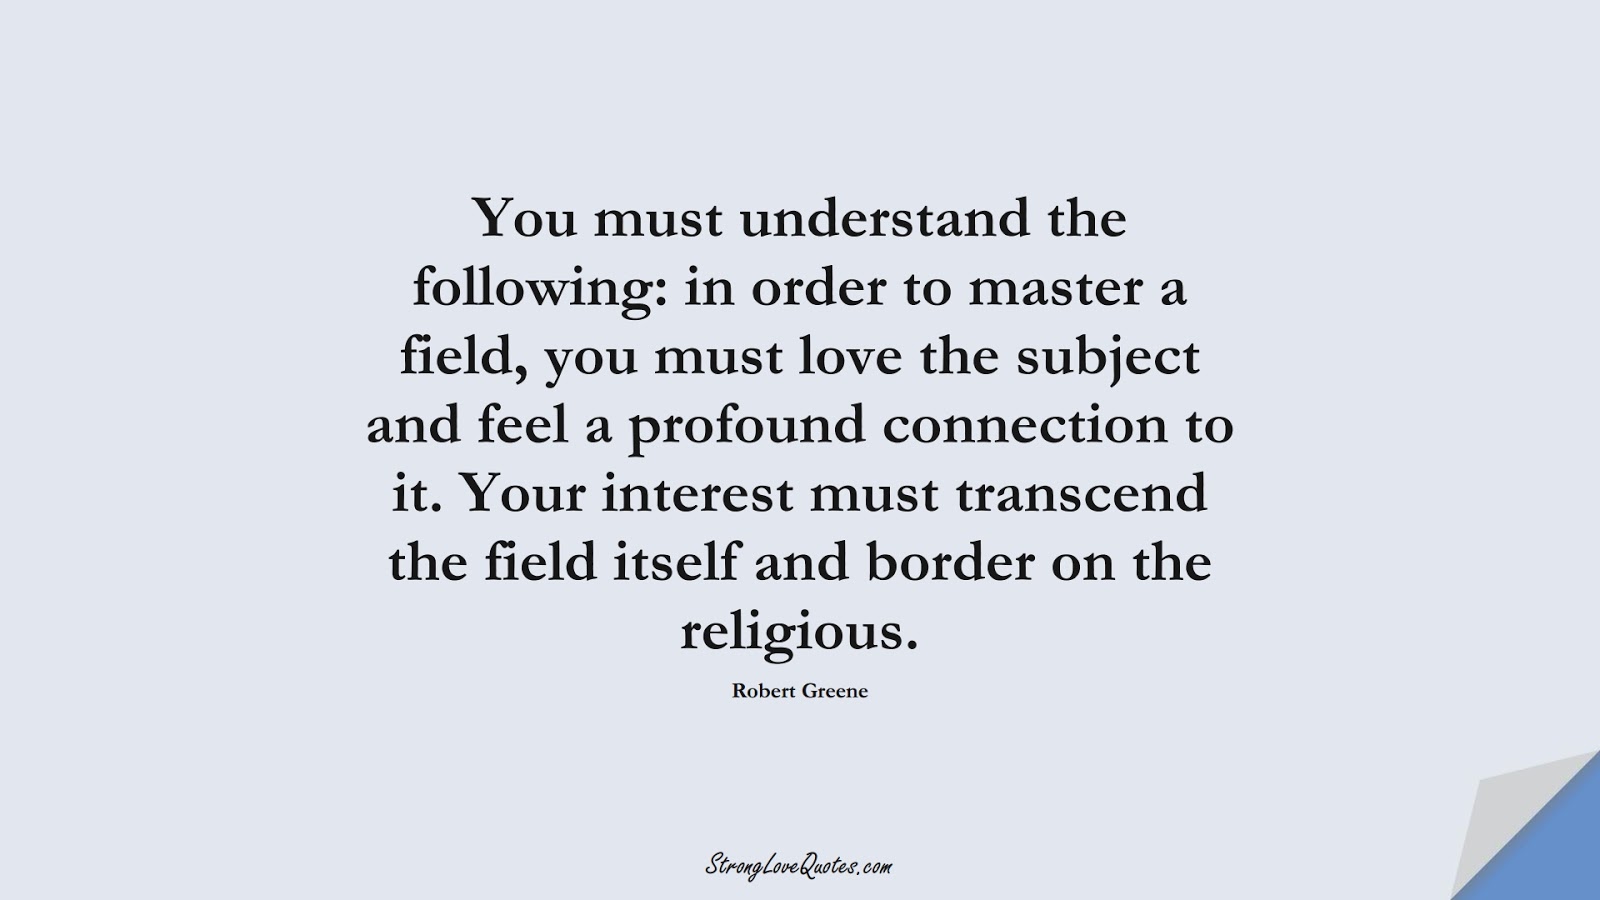 You must understand the following: in order to master a field, you must love the subject and feel a profound connection to it. Your interest must transcend the field itself and border on the religious. (Robert Greene);  #KnowledgeQuotes